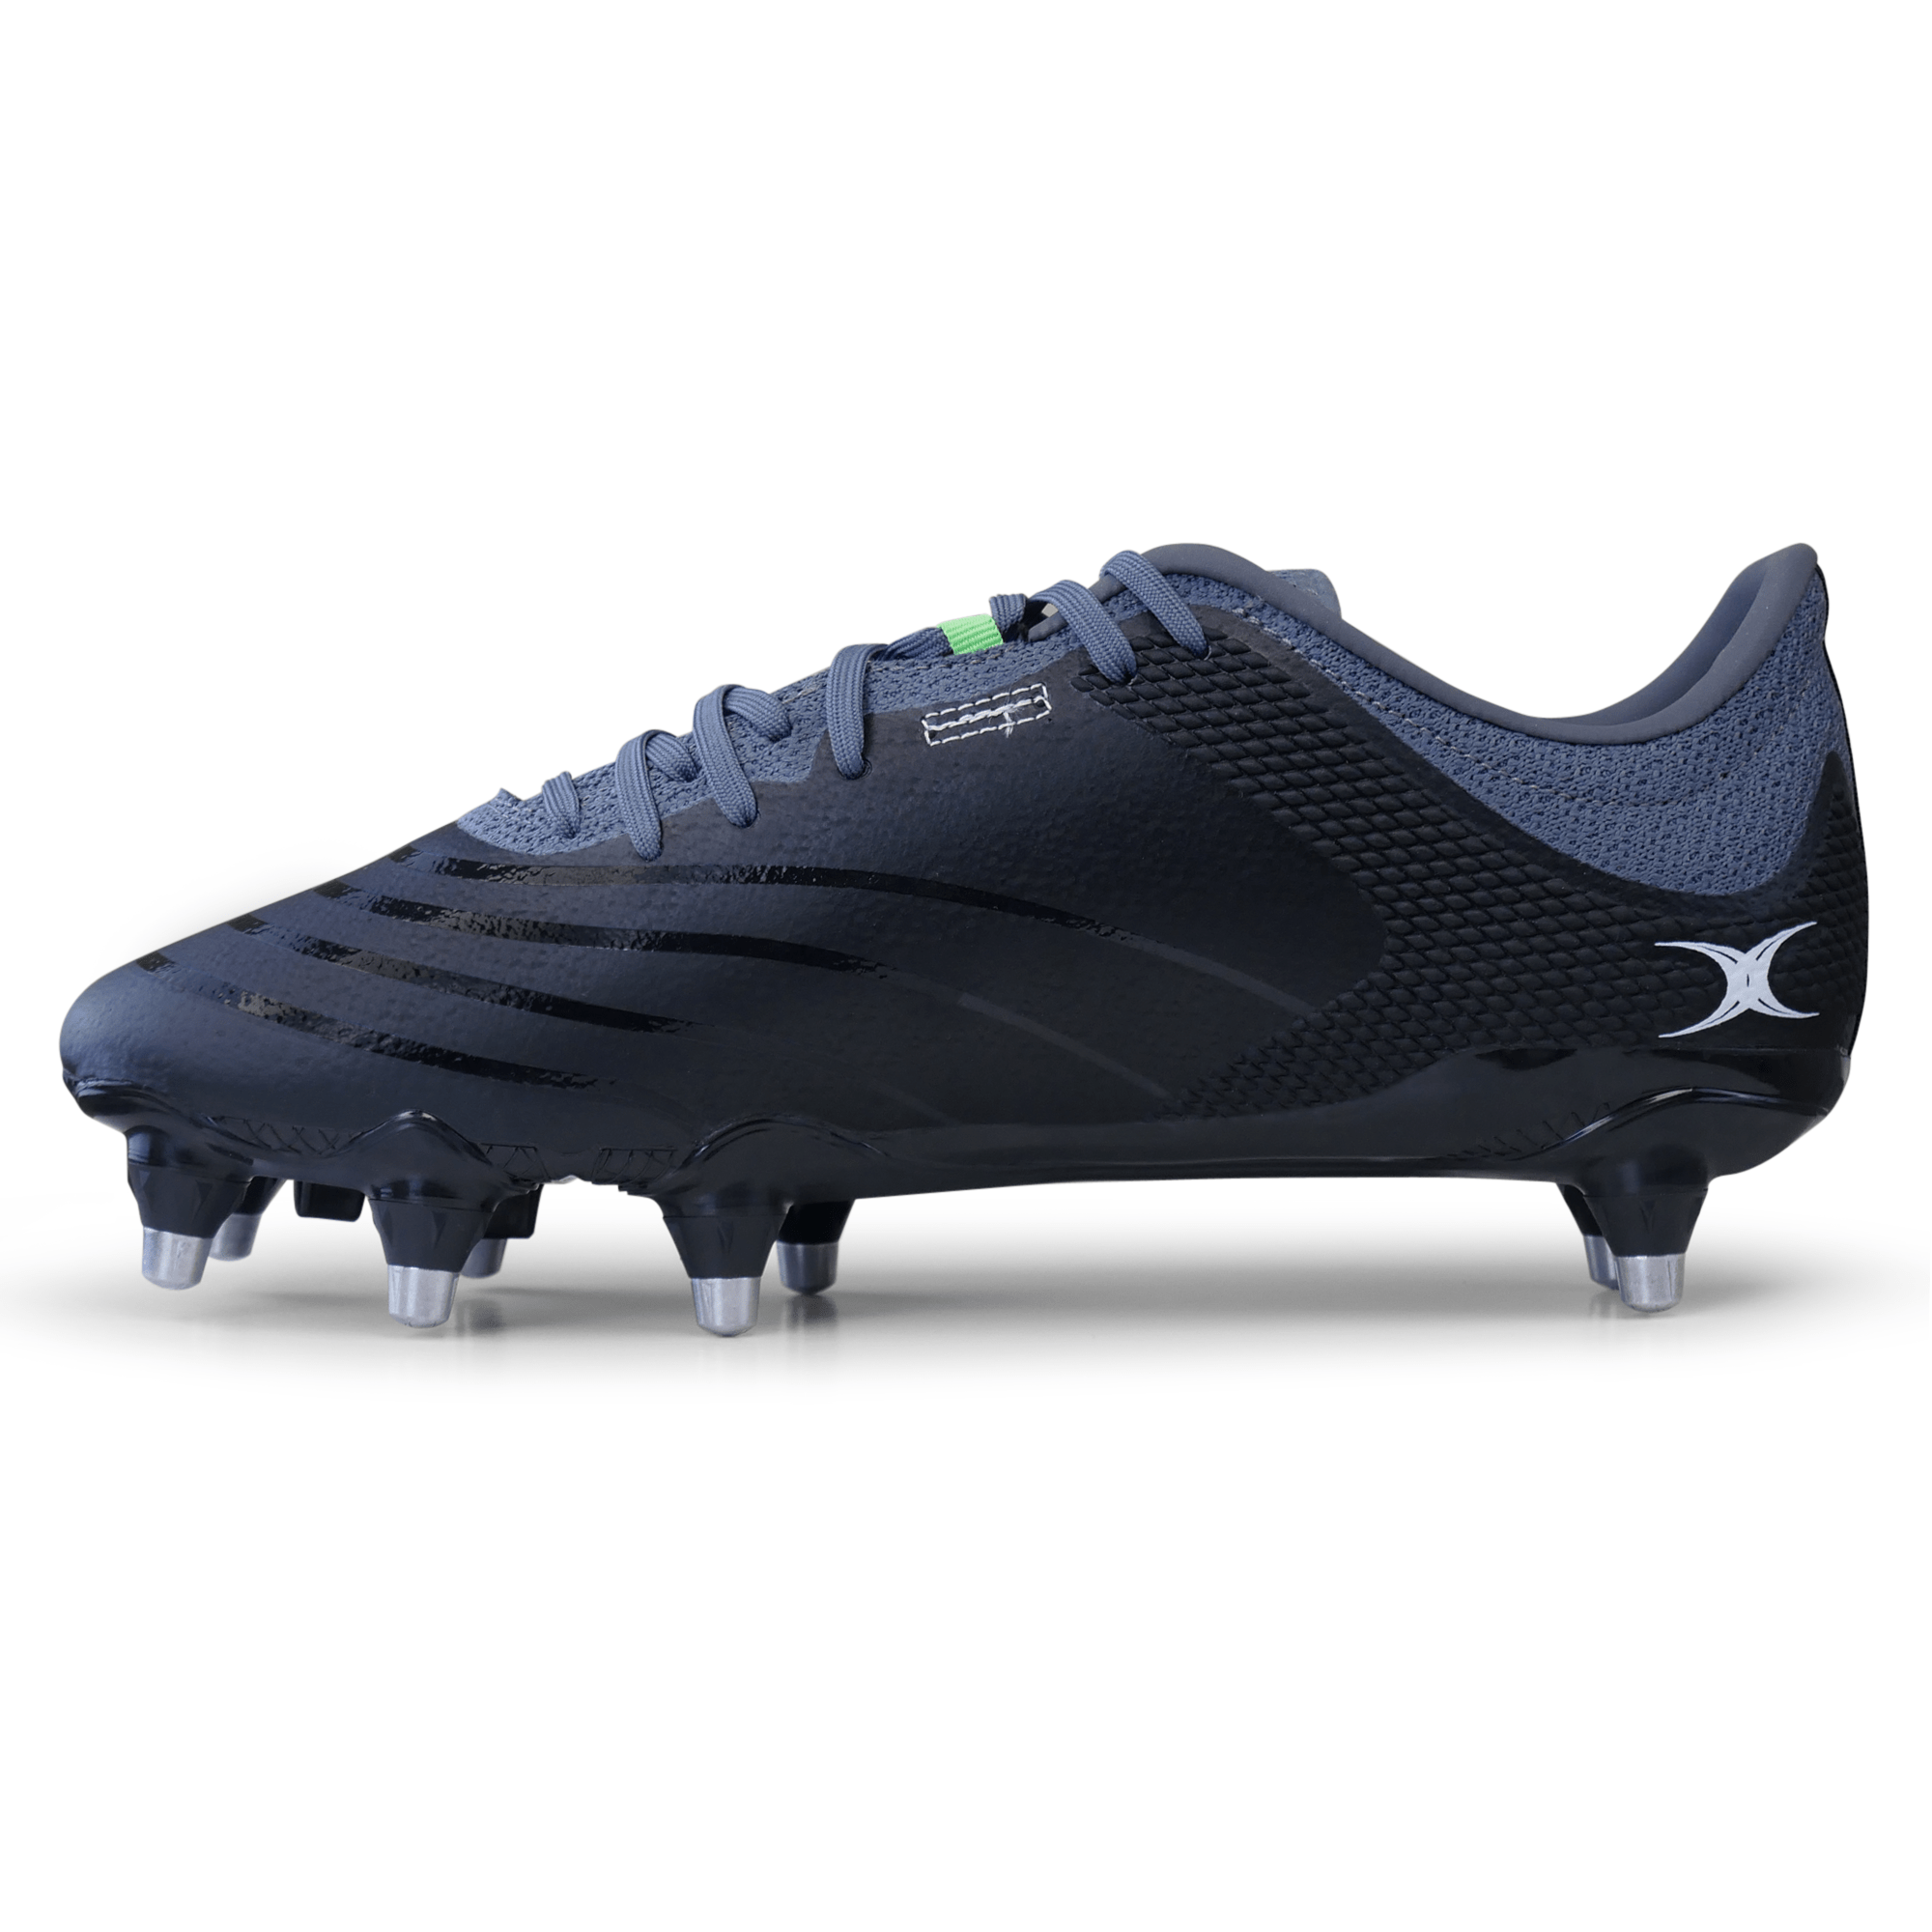 Gilbert Kinetica Pro Power Rugby Cleat - Soft Ground Boot - Black - SKU 87387340